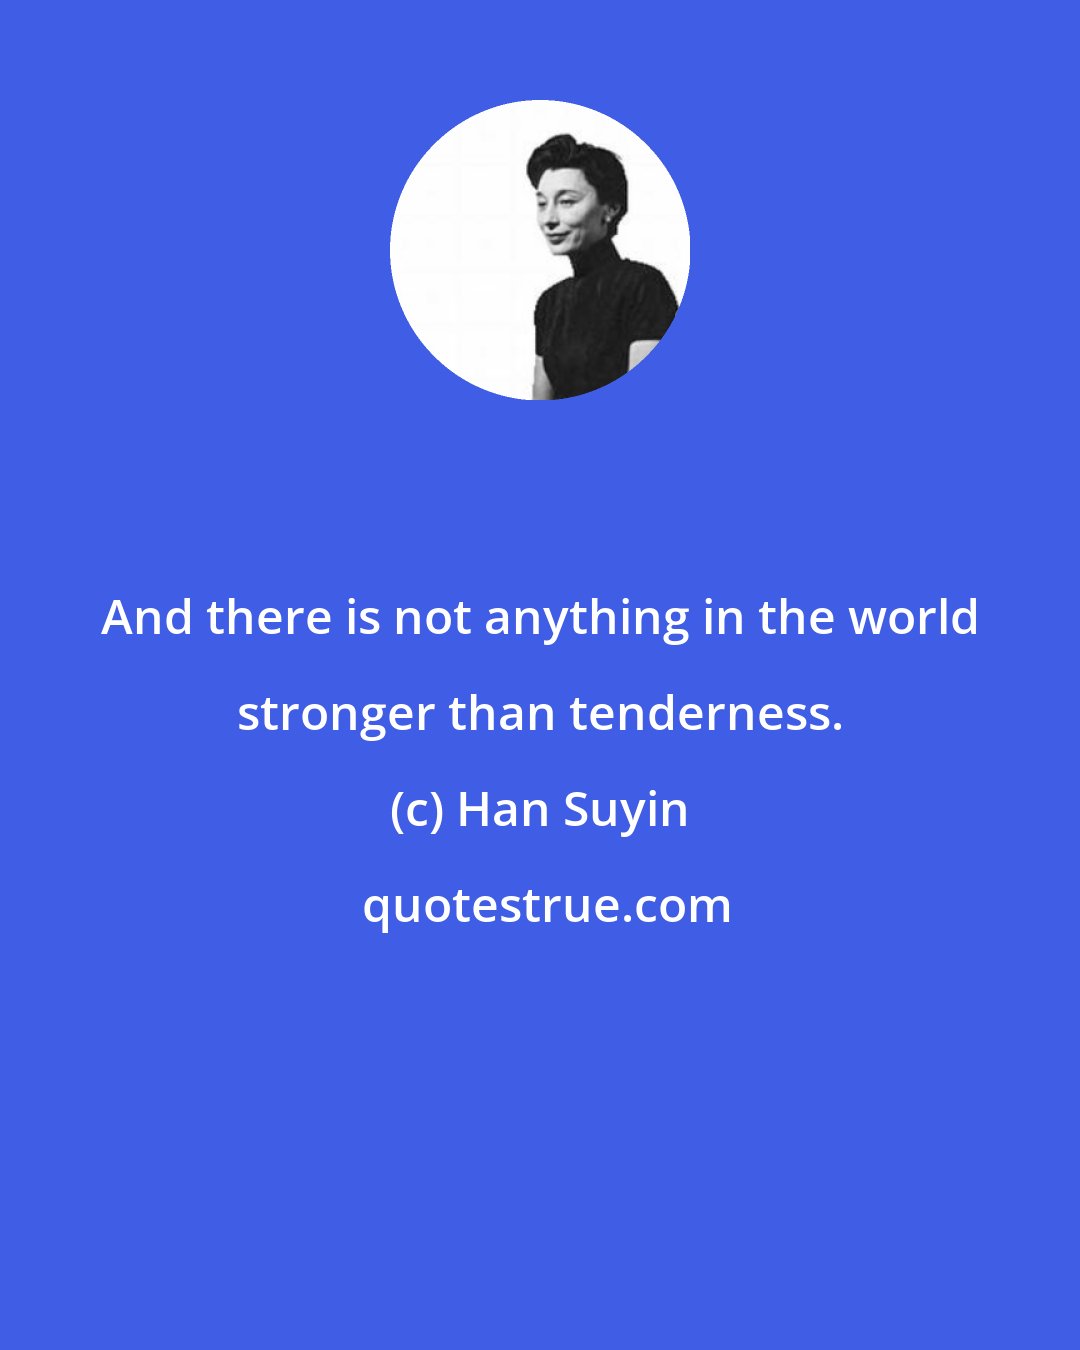 Han Suyin: And there is not anything in the world stronger than tenderness.